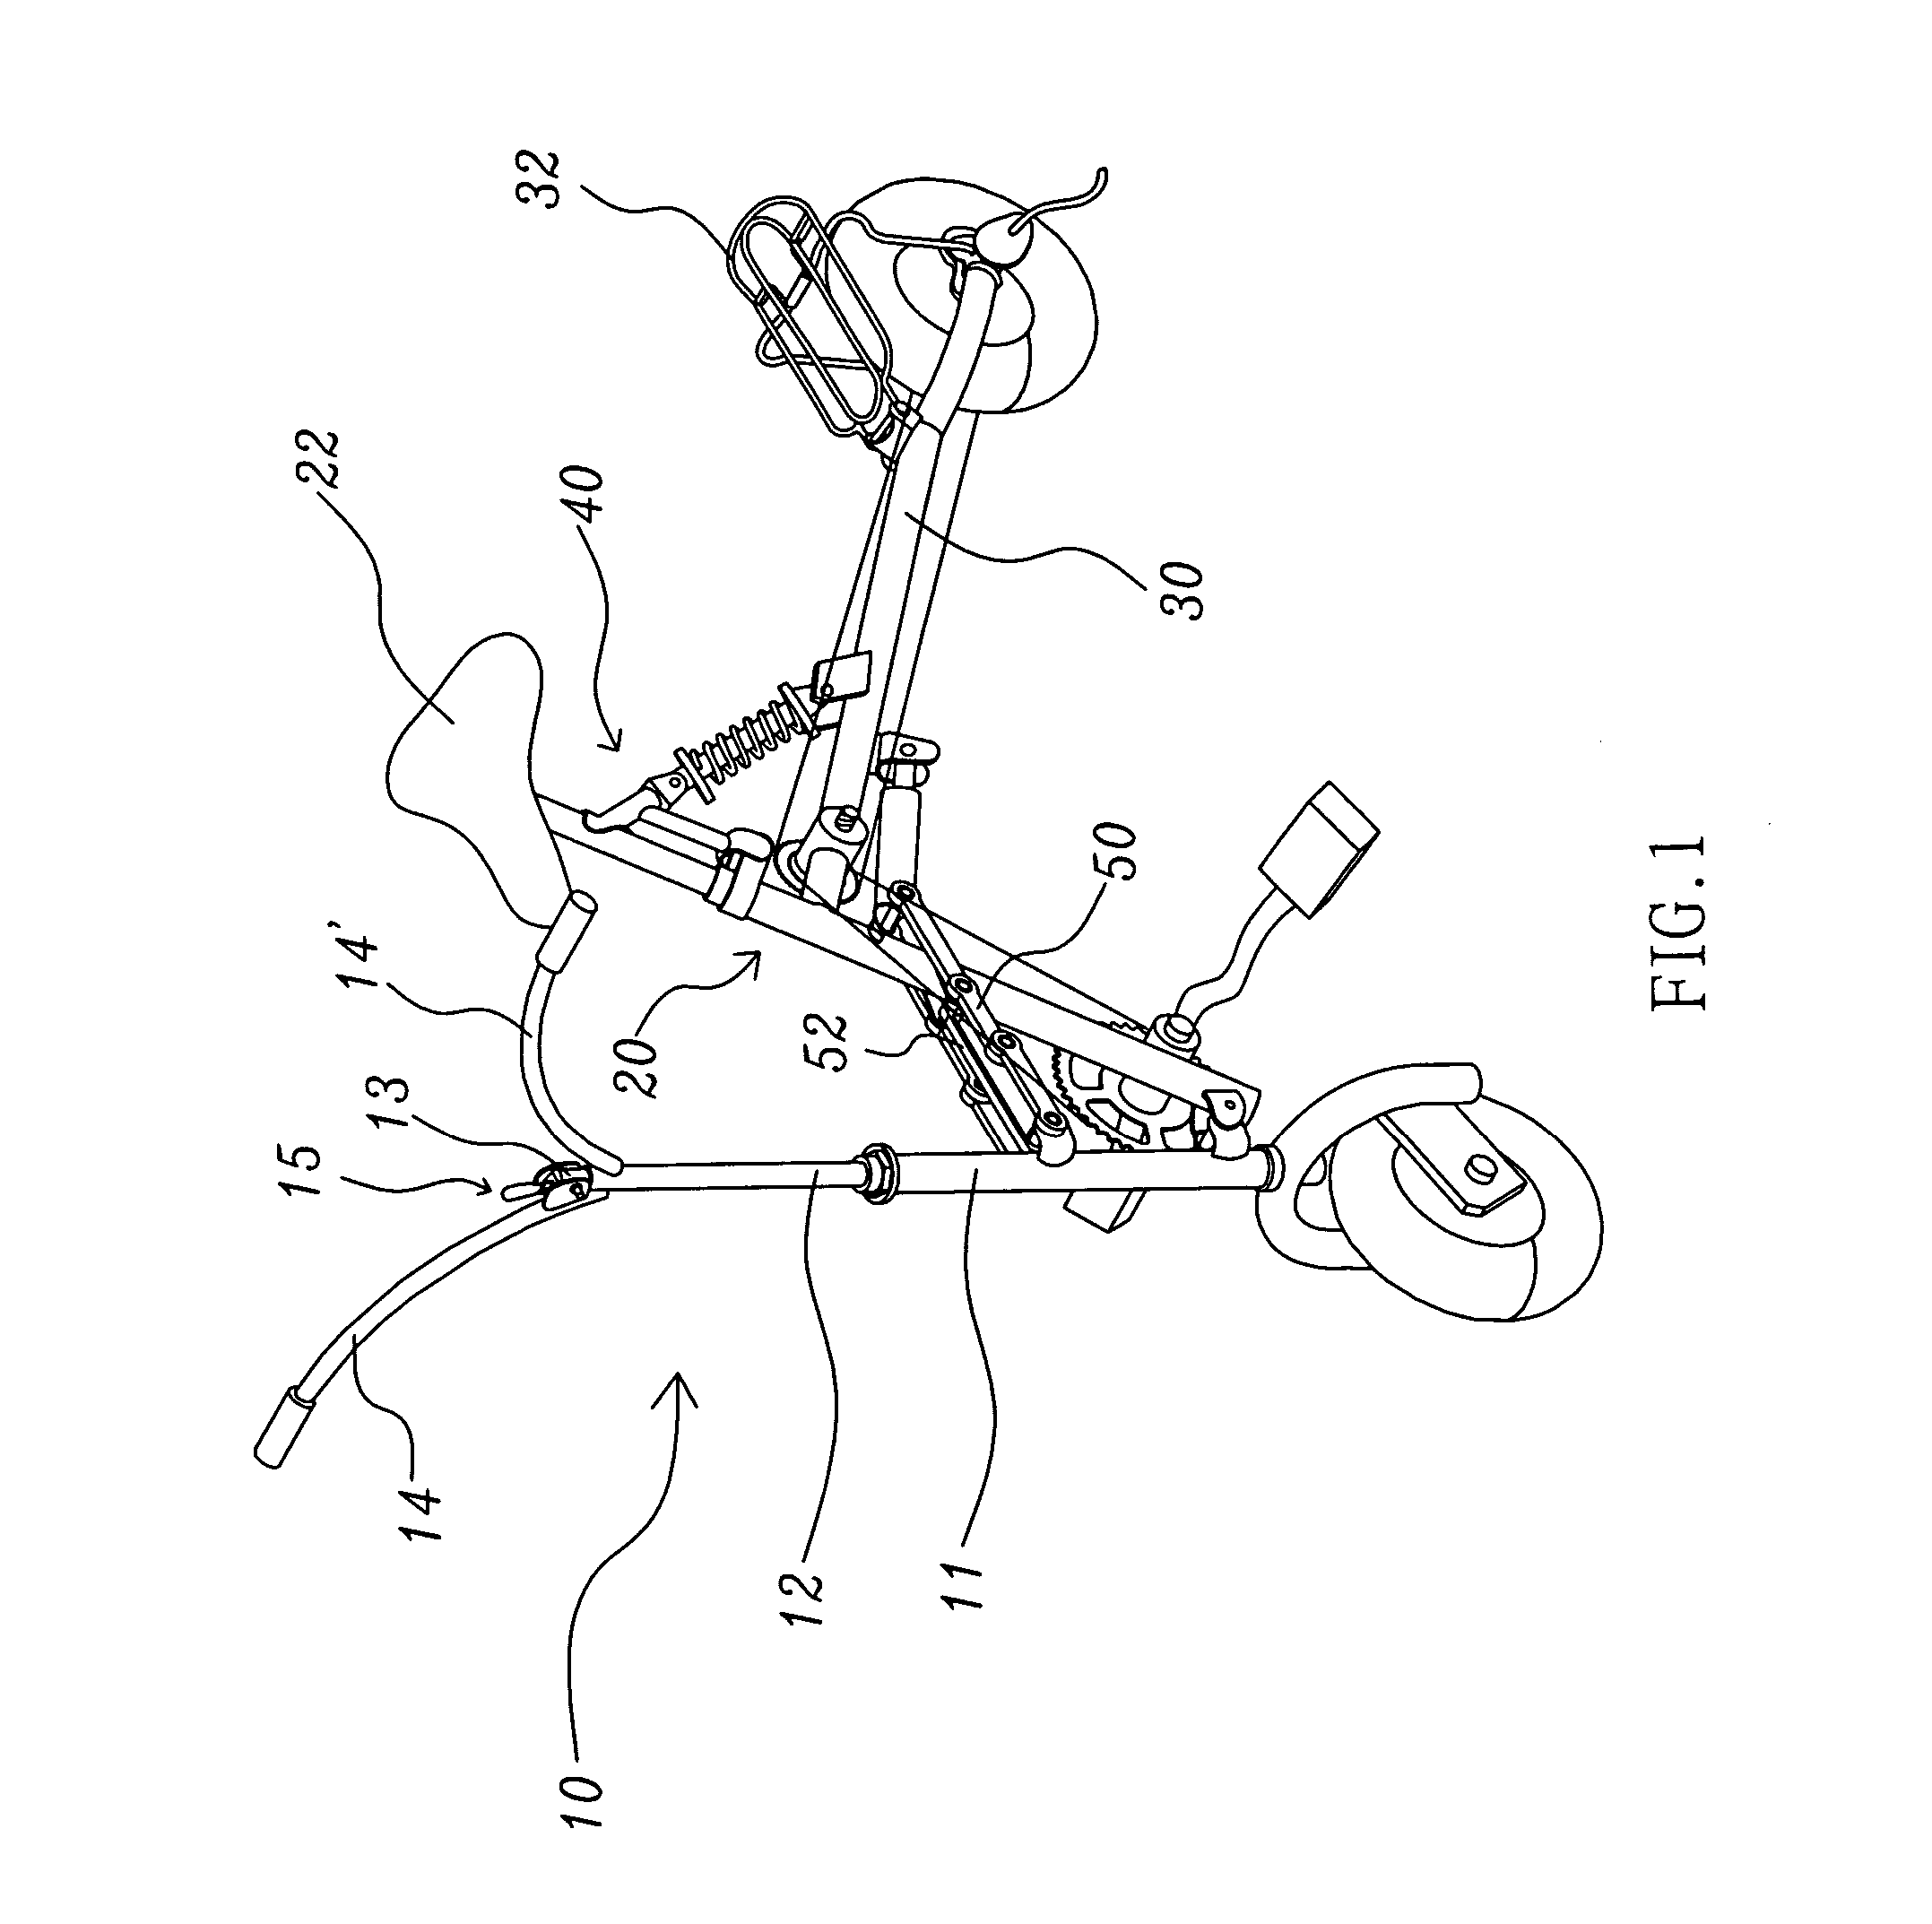 Folding bicycle structure